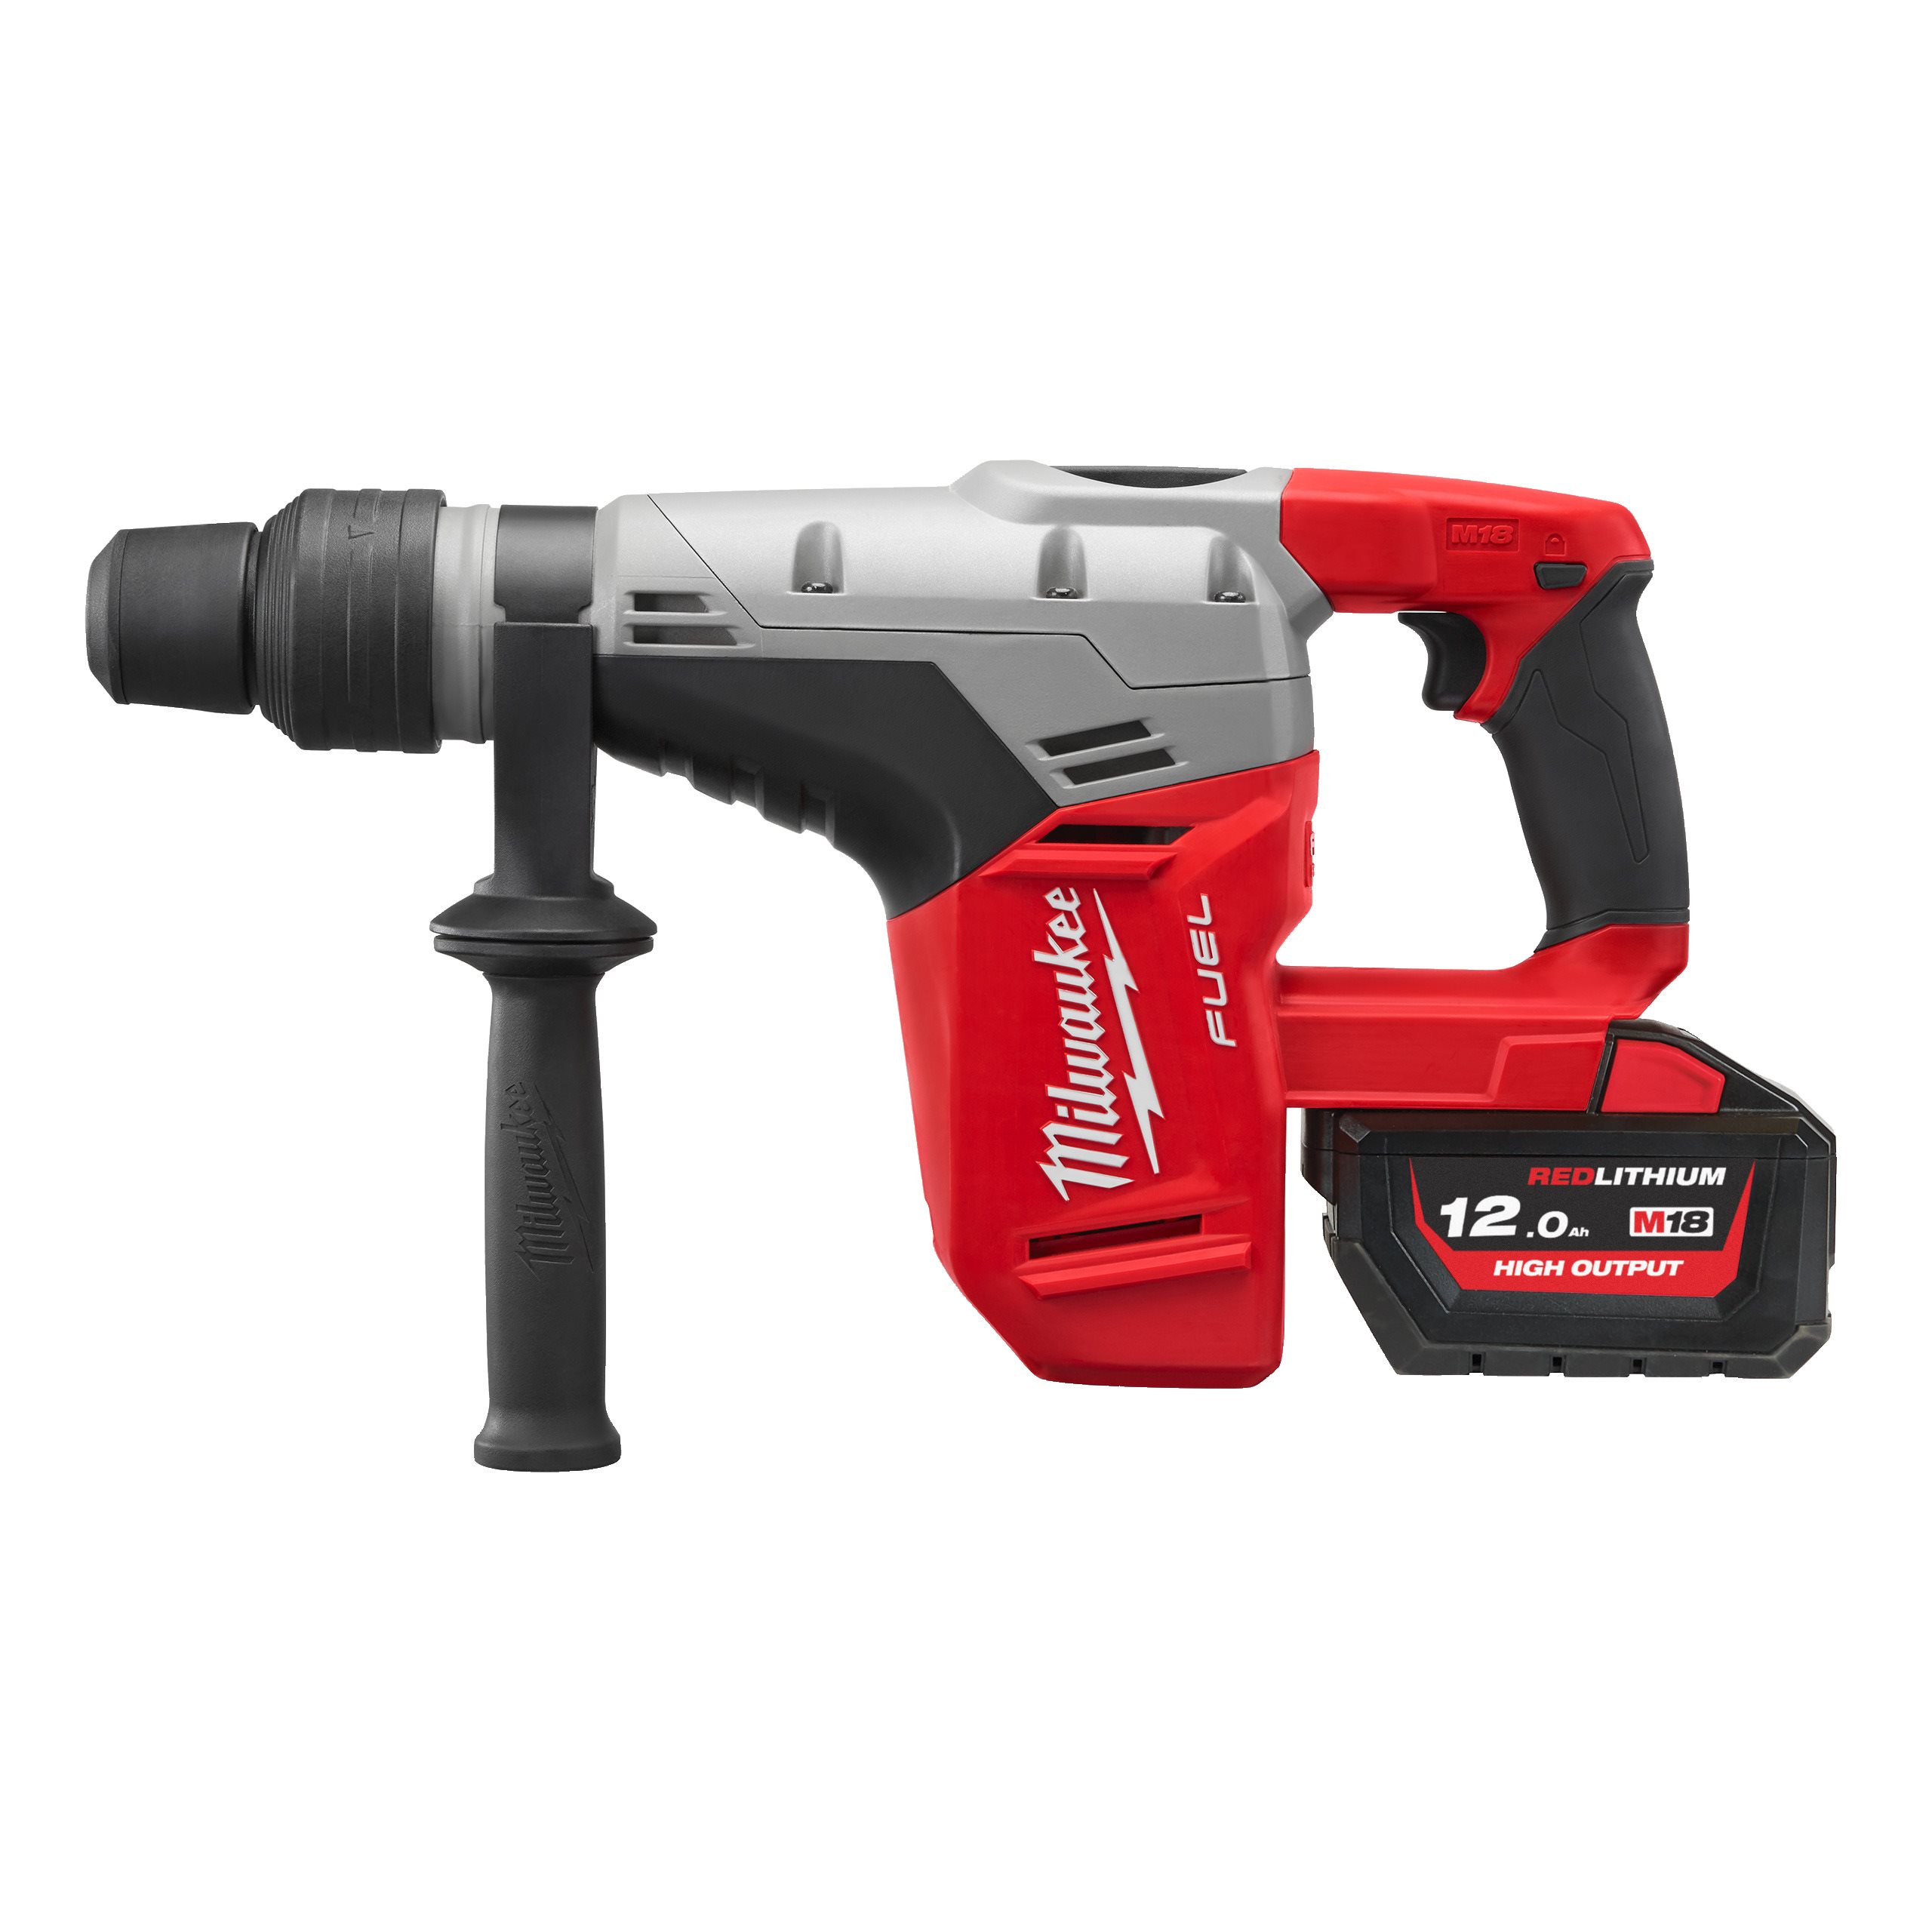 M18 Fuel 5kg Drilling Breaking Hammer M18 Chm Milwaukee Tools Europe